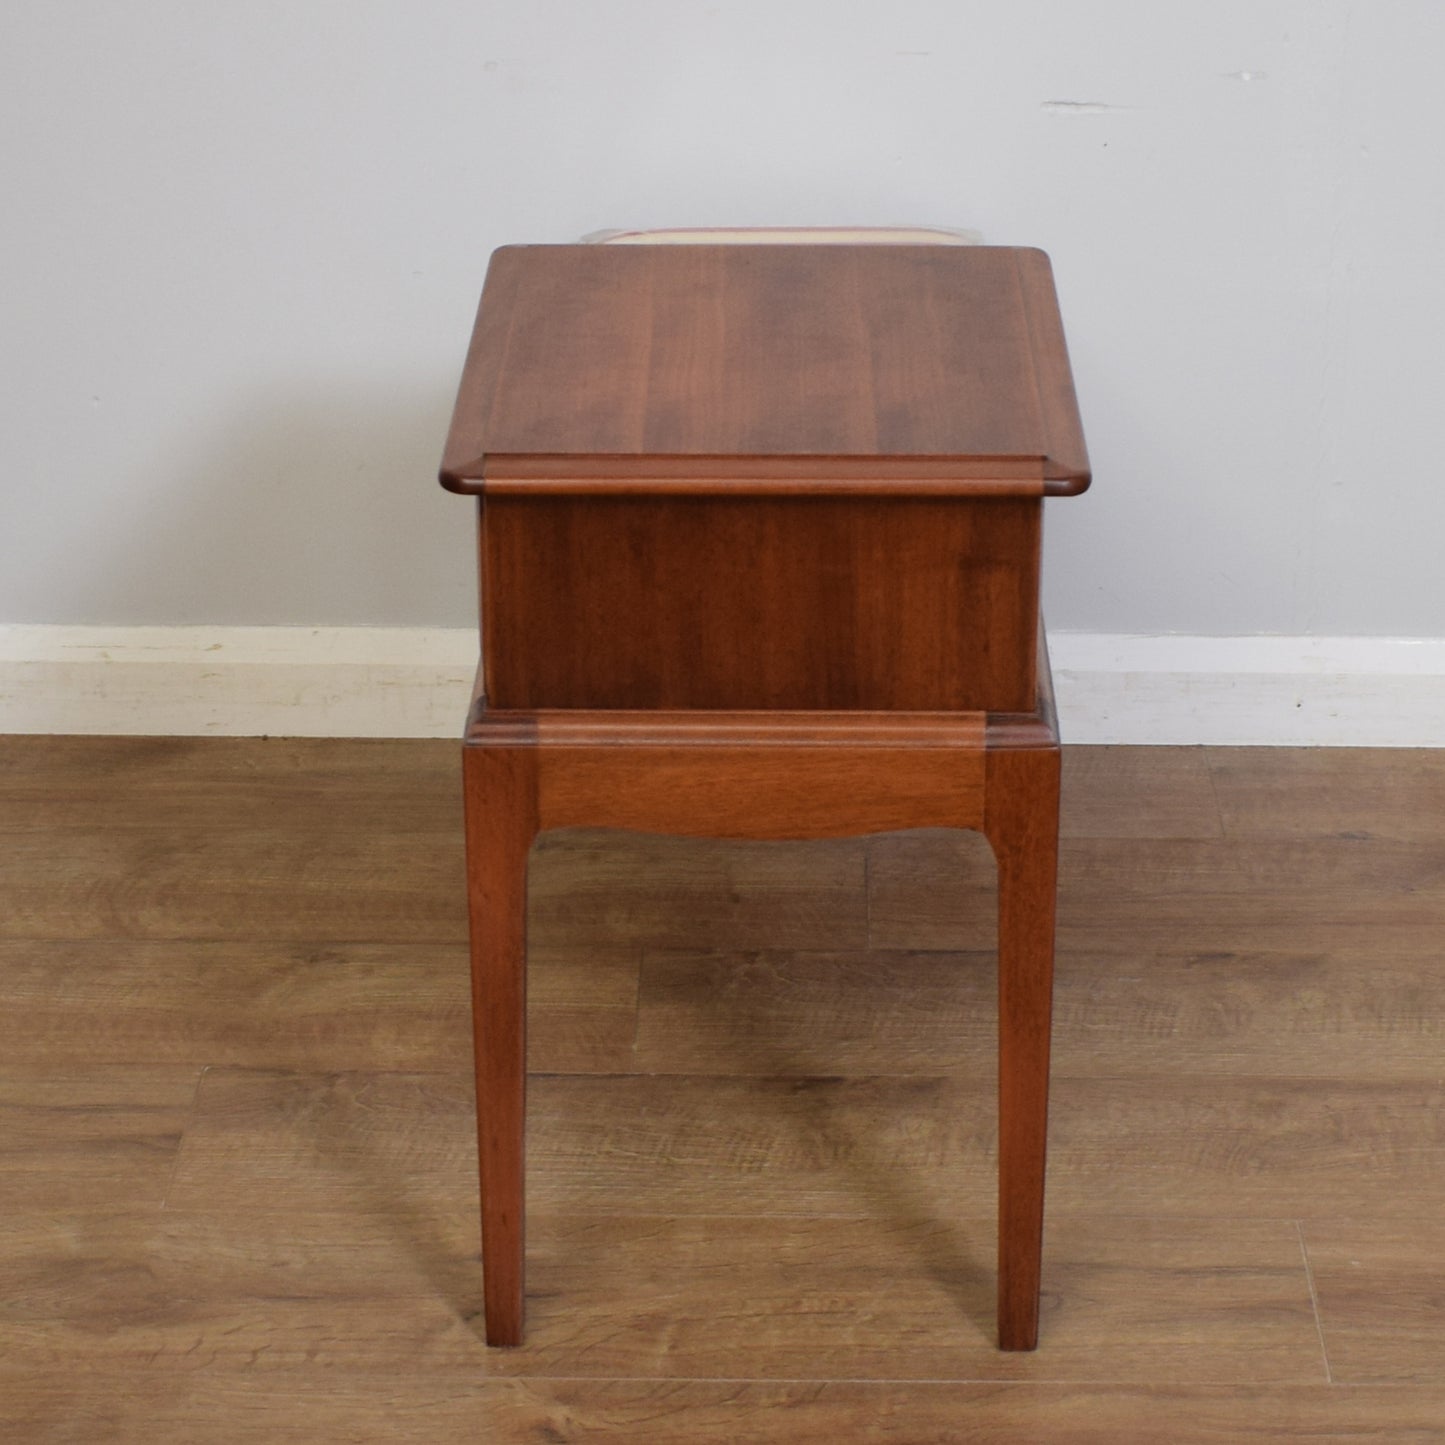 Restored Stag Telephone Table